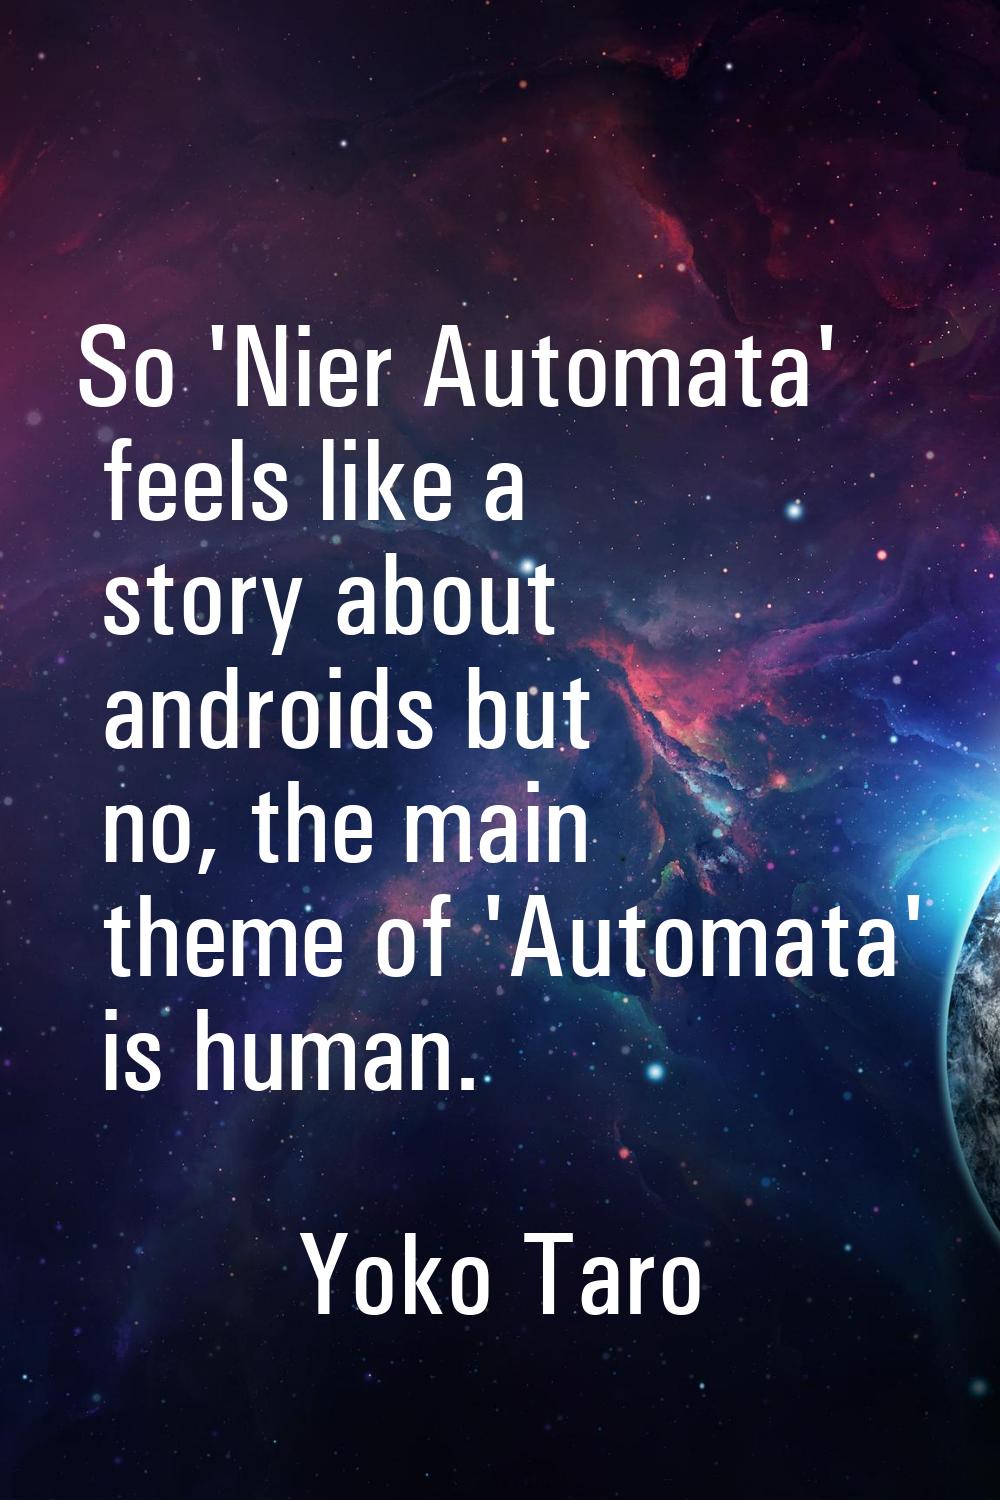 So 'Nier Automata' feels like a story about androids but no, the main theme of 'Automata' is human.